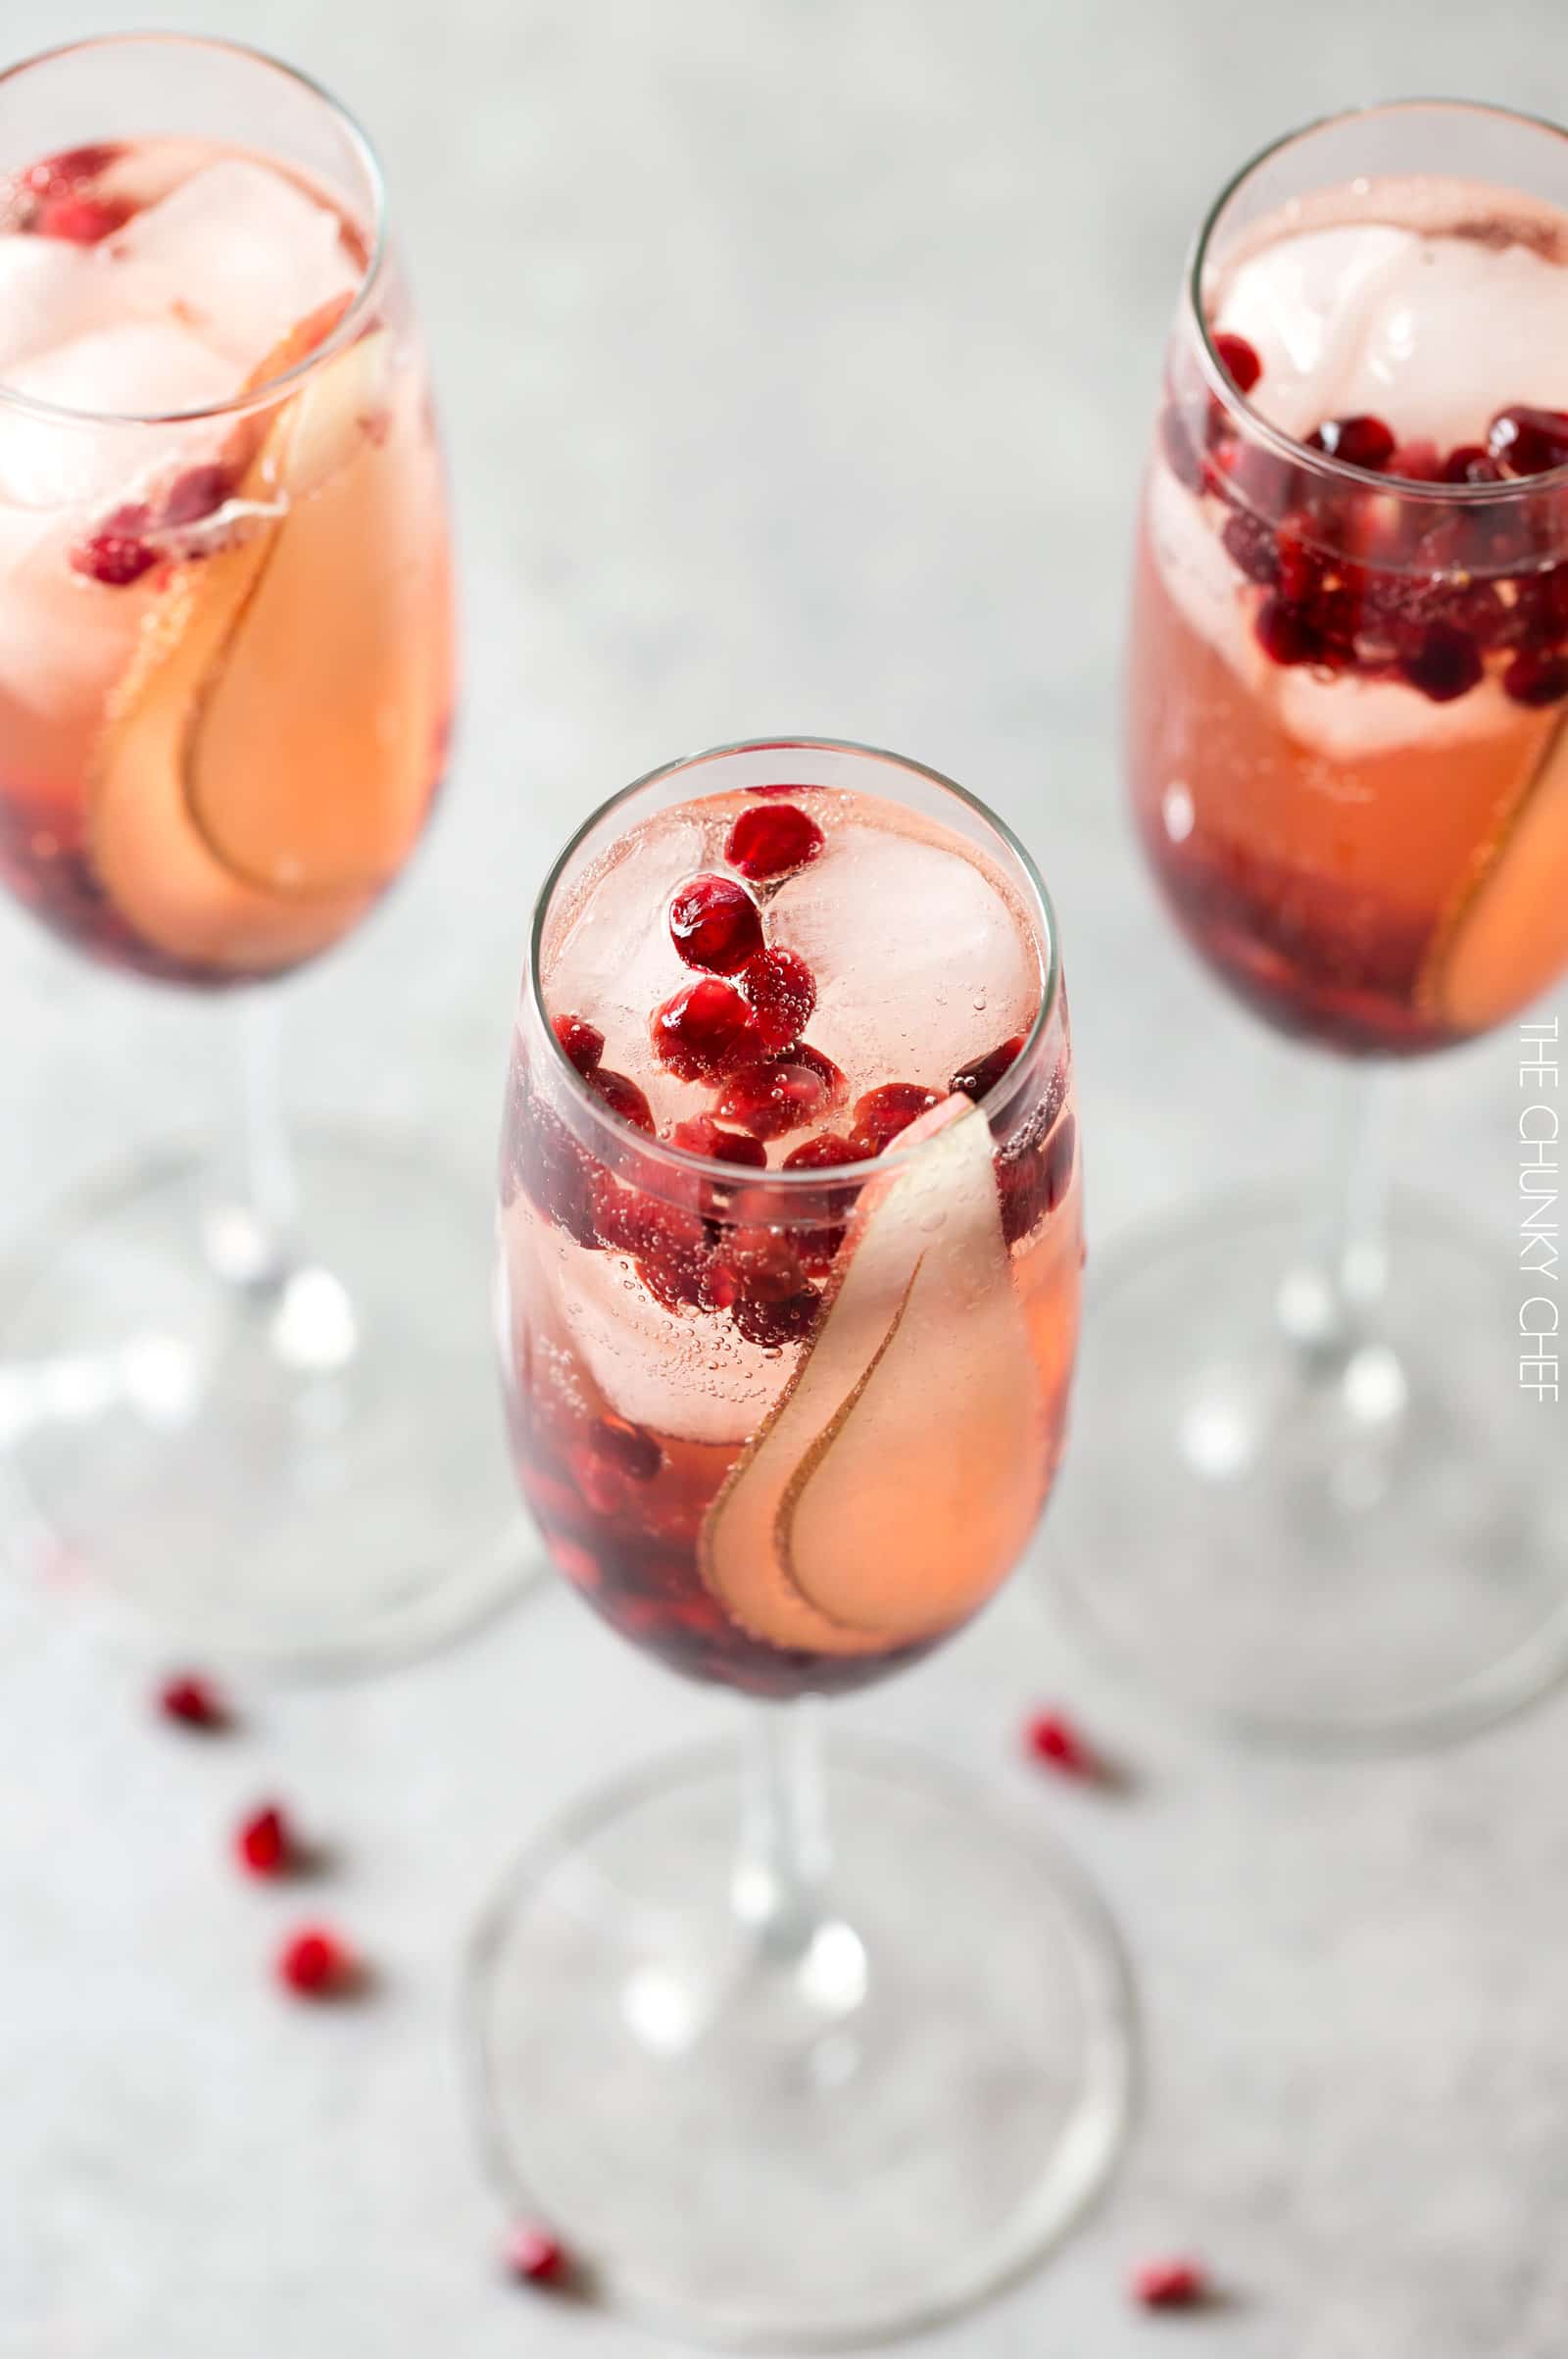 Pear Pomegranate Bellini | A delightful combination of Prosecco and pear brandy create this light, bubbly, and elegant Bellini! As pretty as it is delicious, it's just the drink you need for your next party or date night! | http://thechunkychef.com